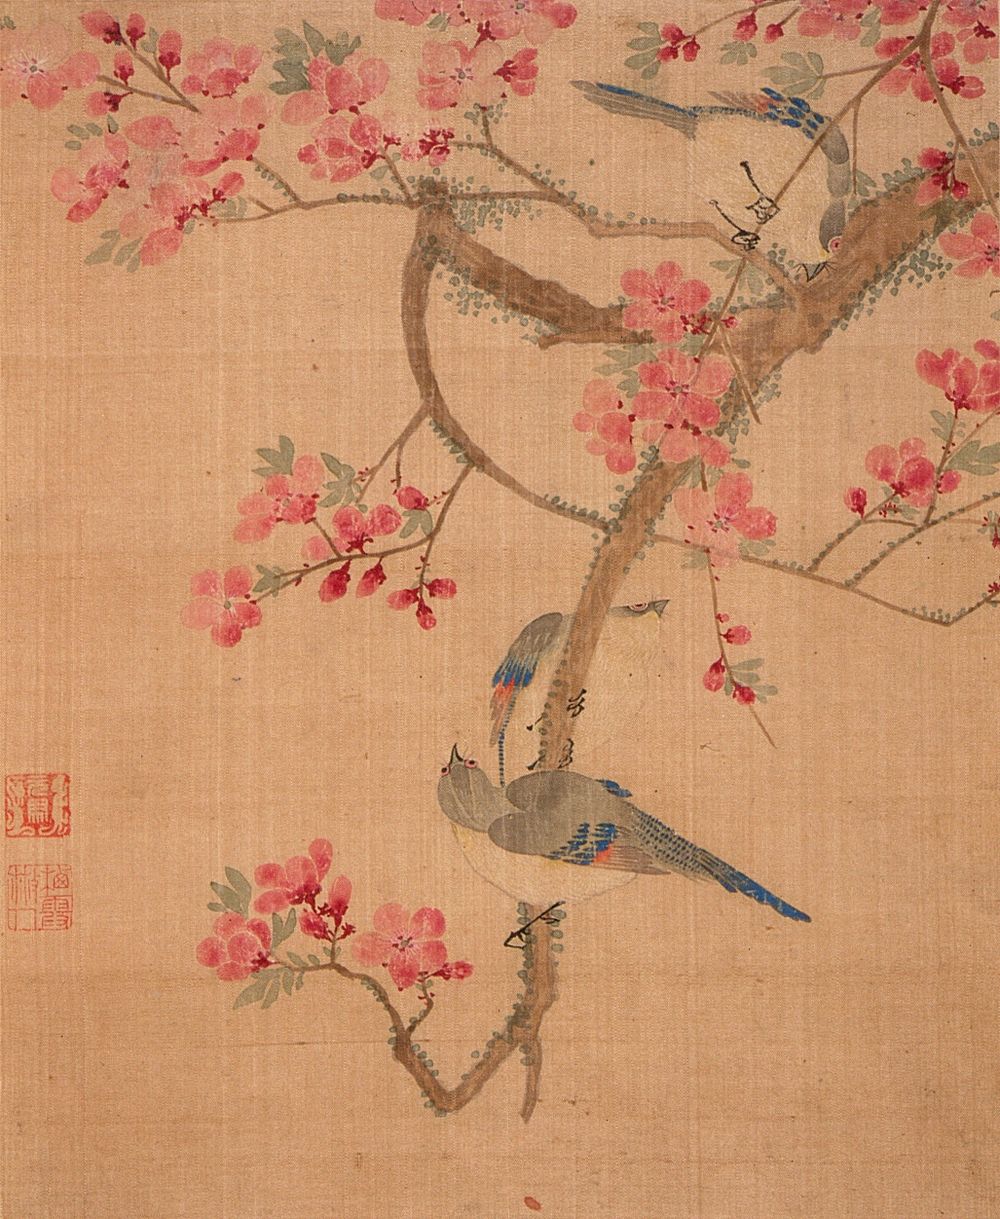 Peach Blossoms and Birds, from the album, Flowers Birds, and Fish by Ma Yuanyu